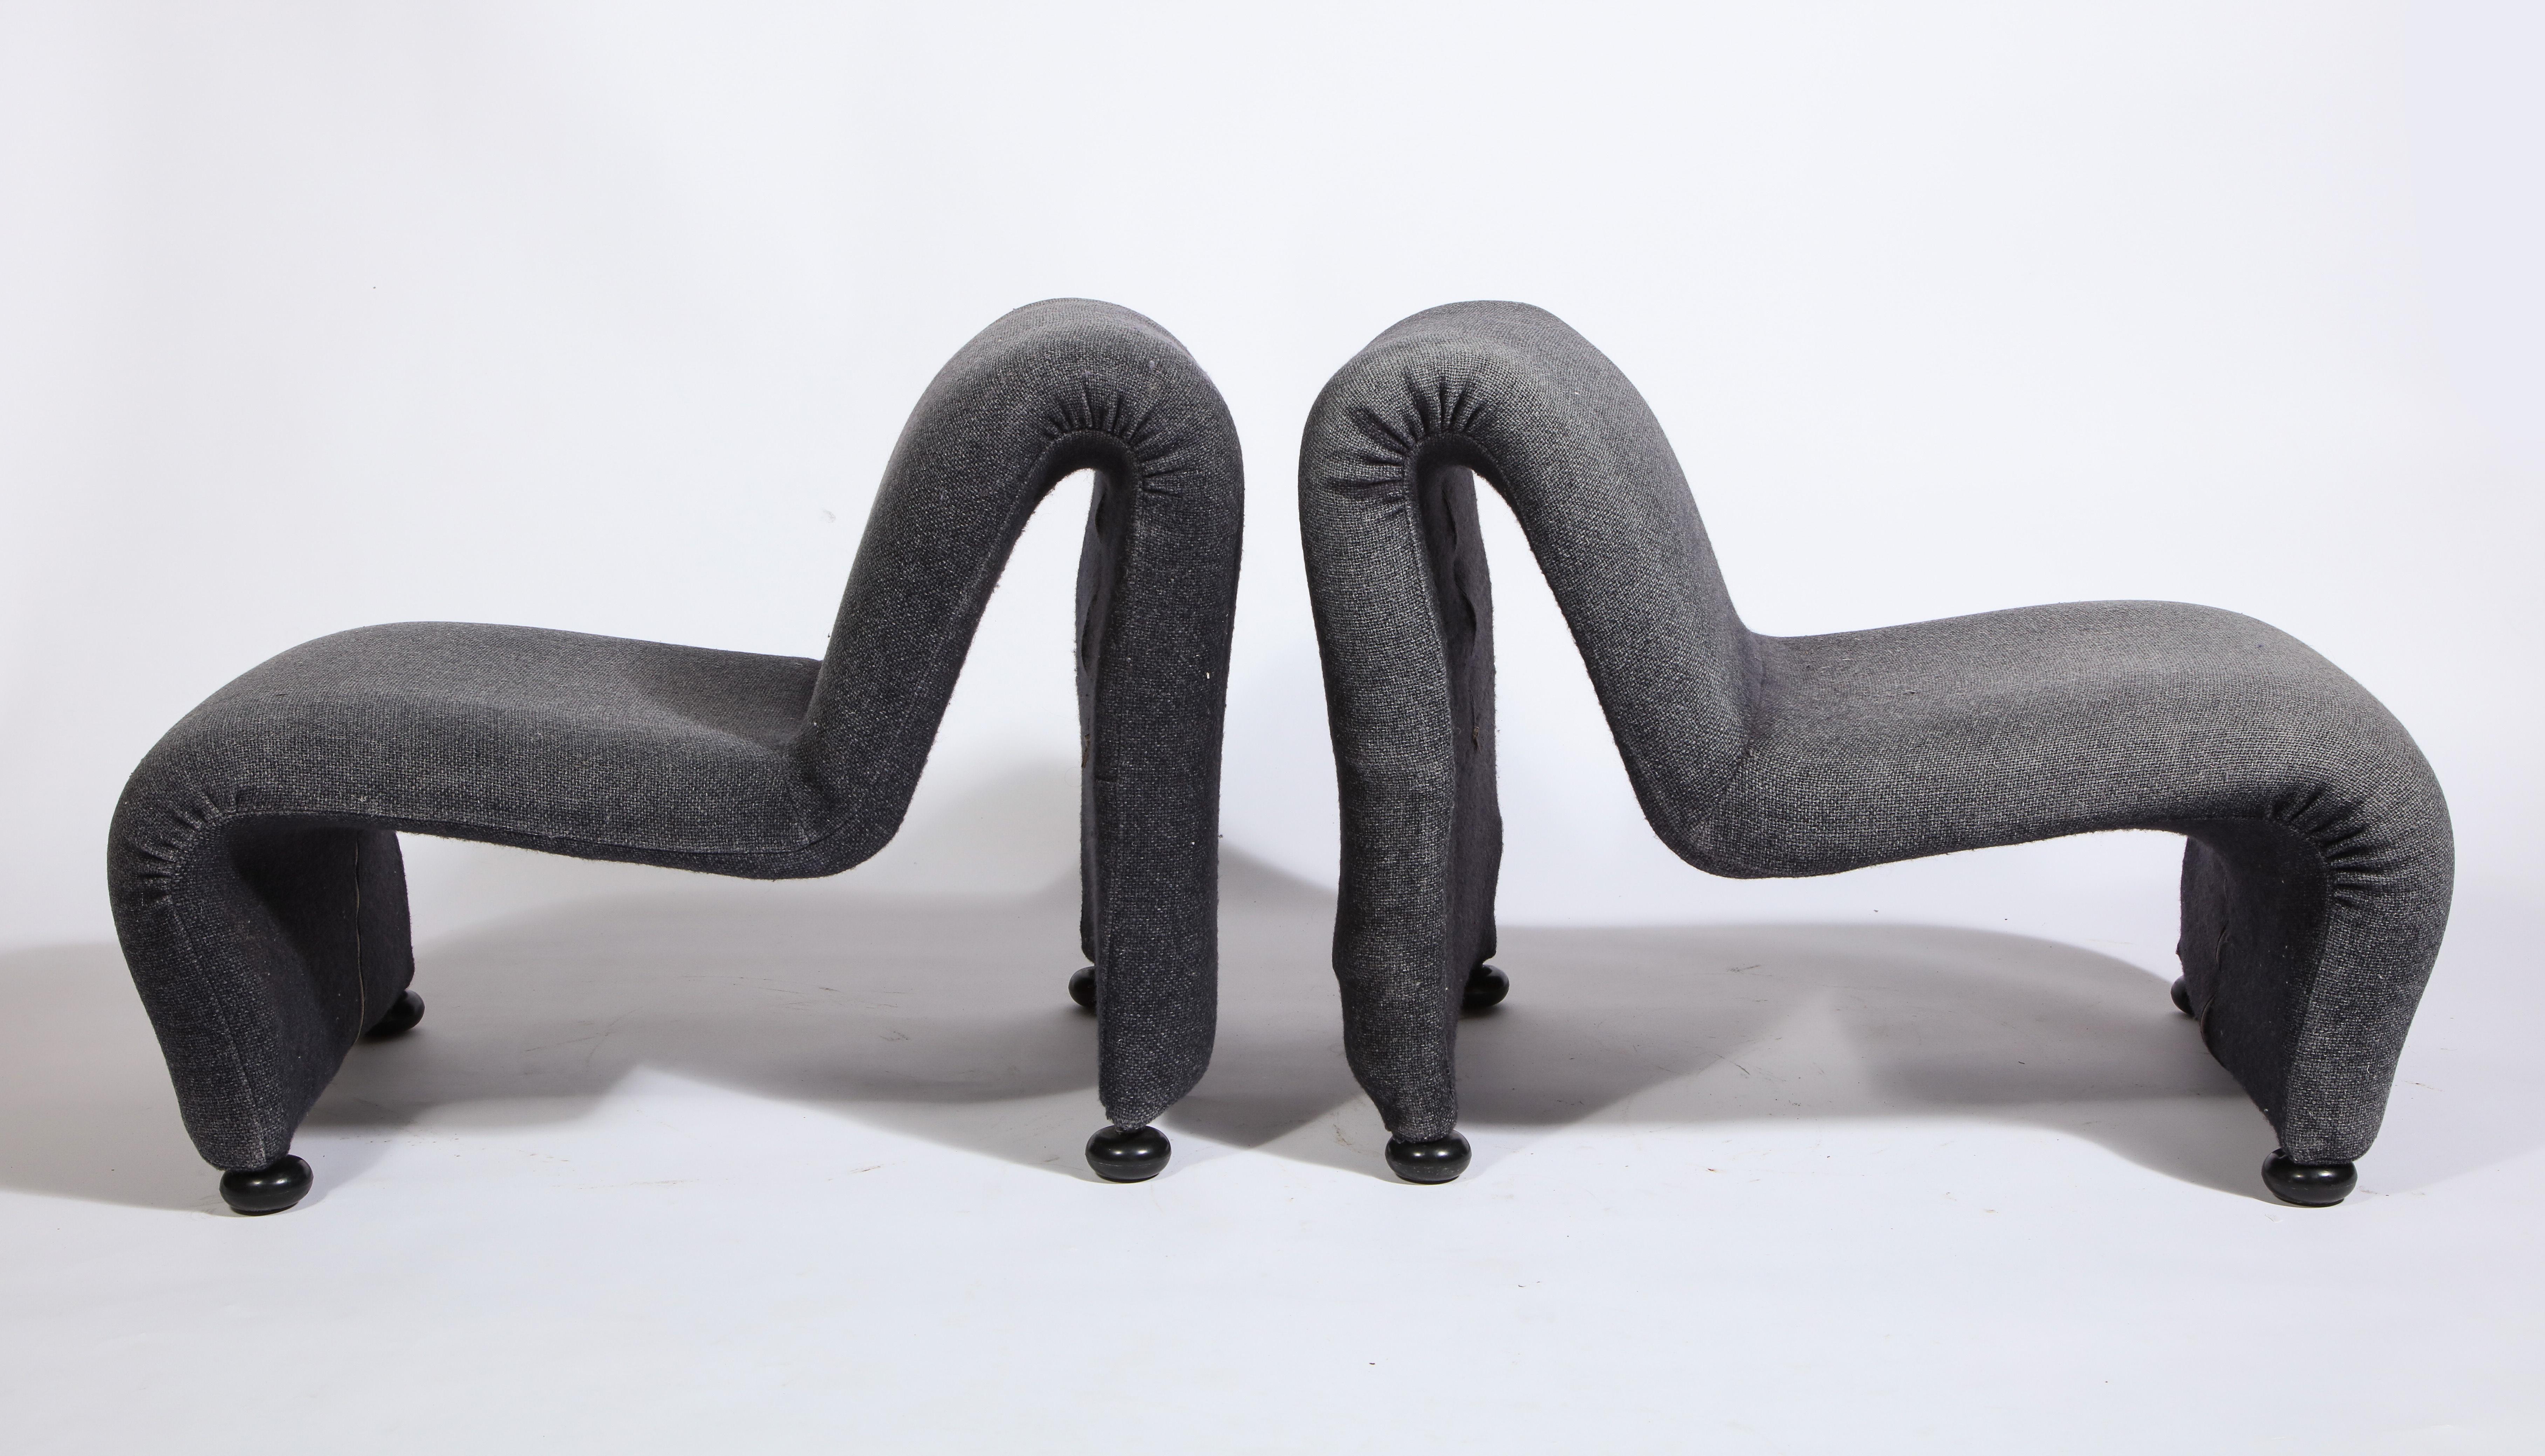 Sculptural Etienne Fermigier lounge chairs, Grey, 1970s, France

Amazing set of chairs, sold individually or as a set of 4. Chic in any setting. Covered in original grey fabric.

Chairs can be purchased individually.
Price is per chair.